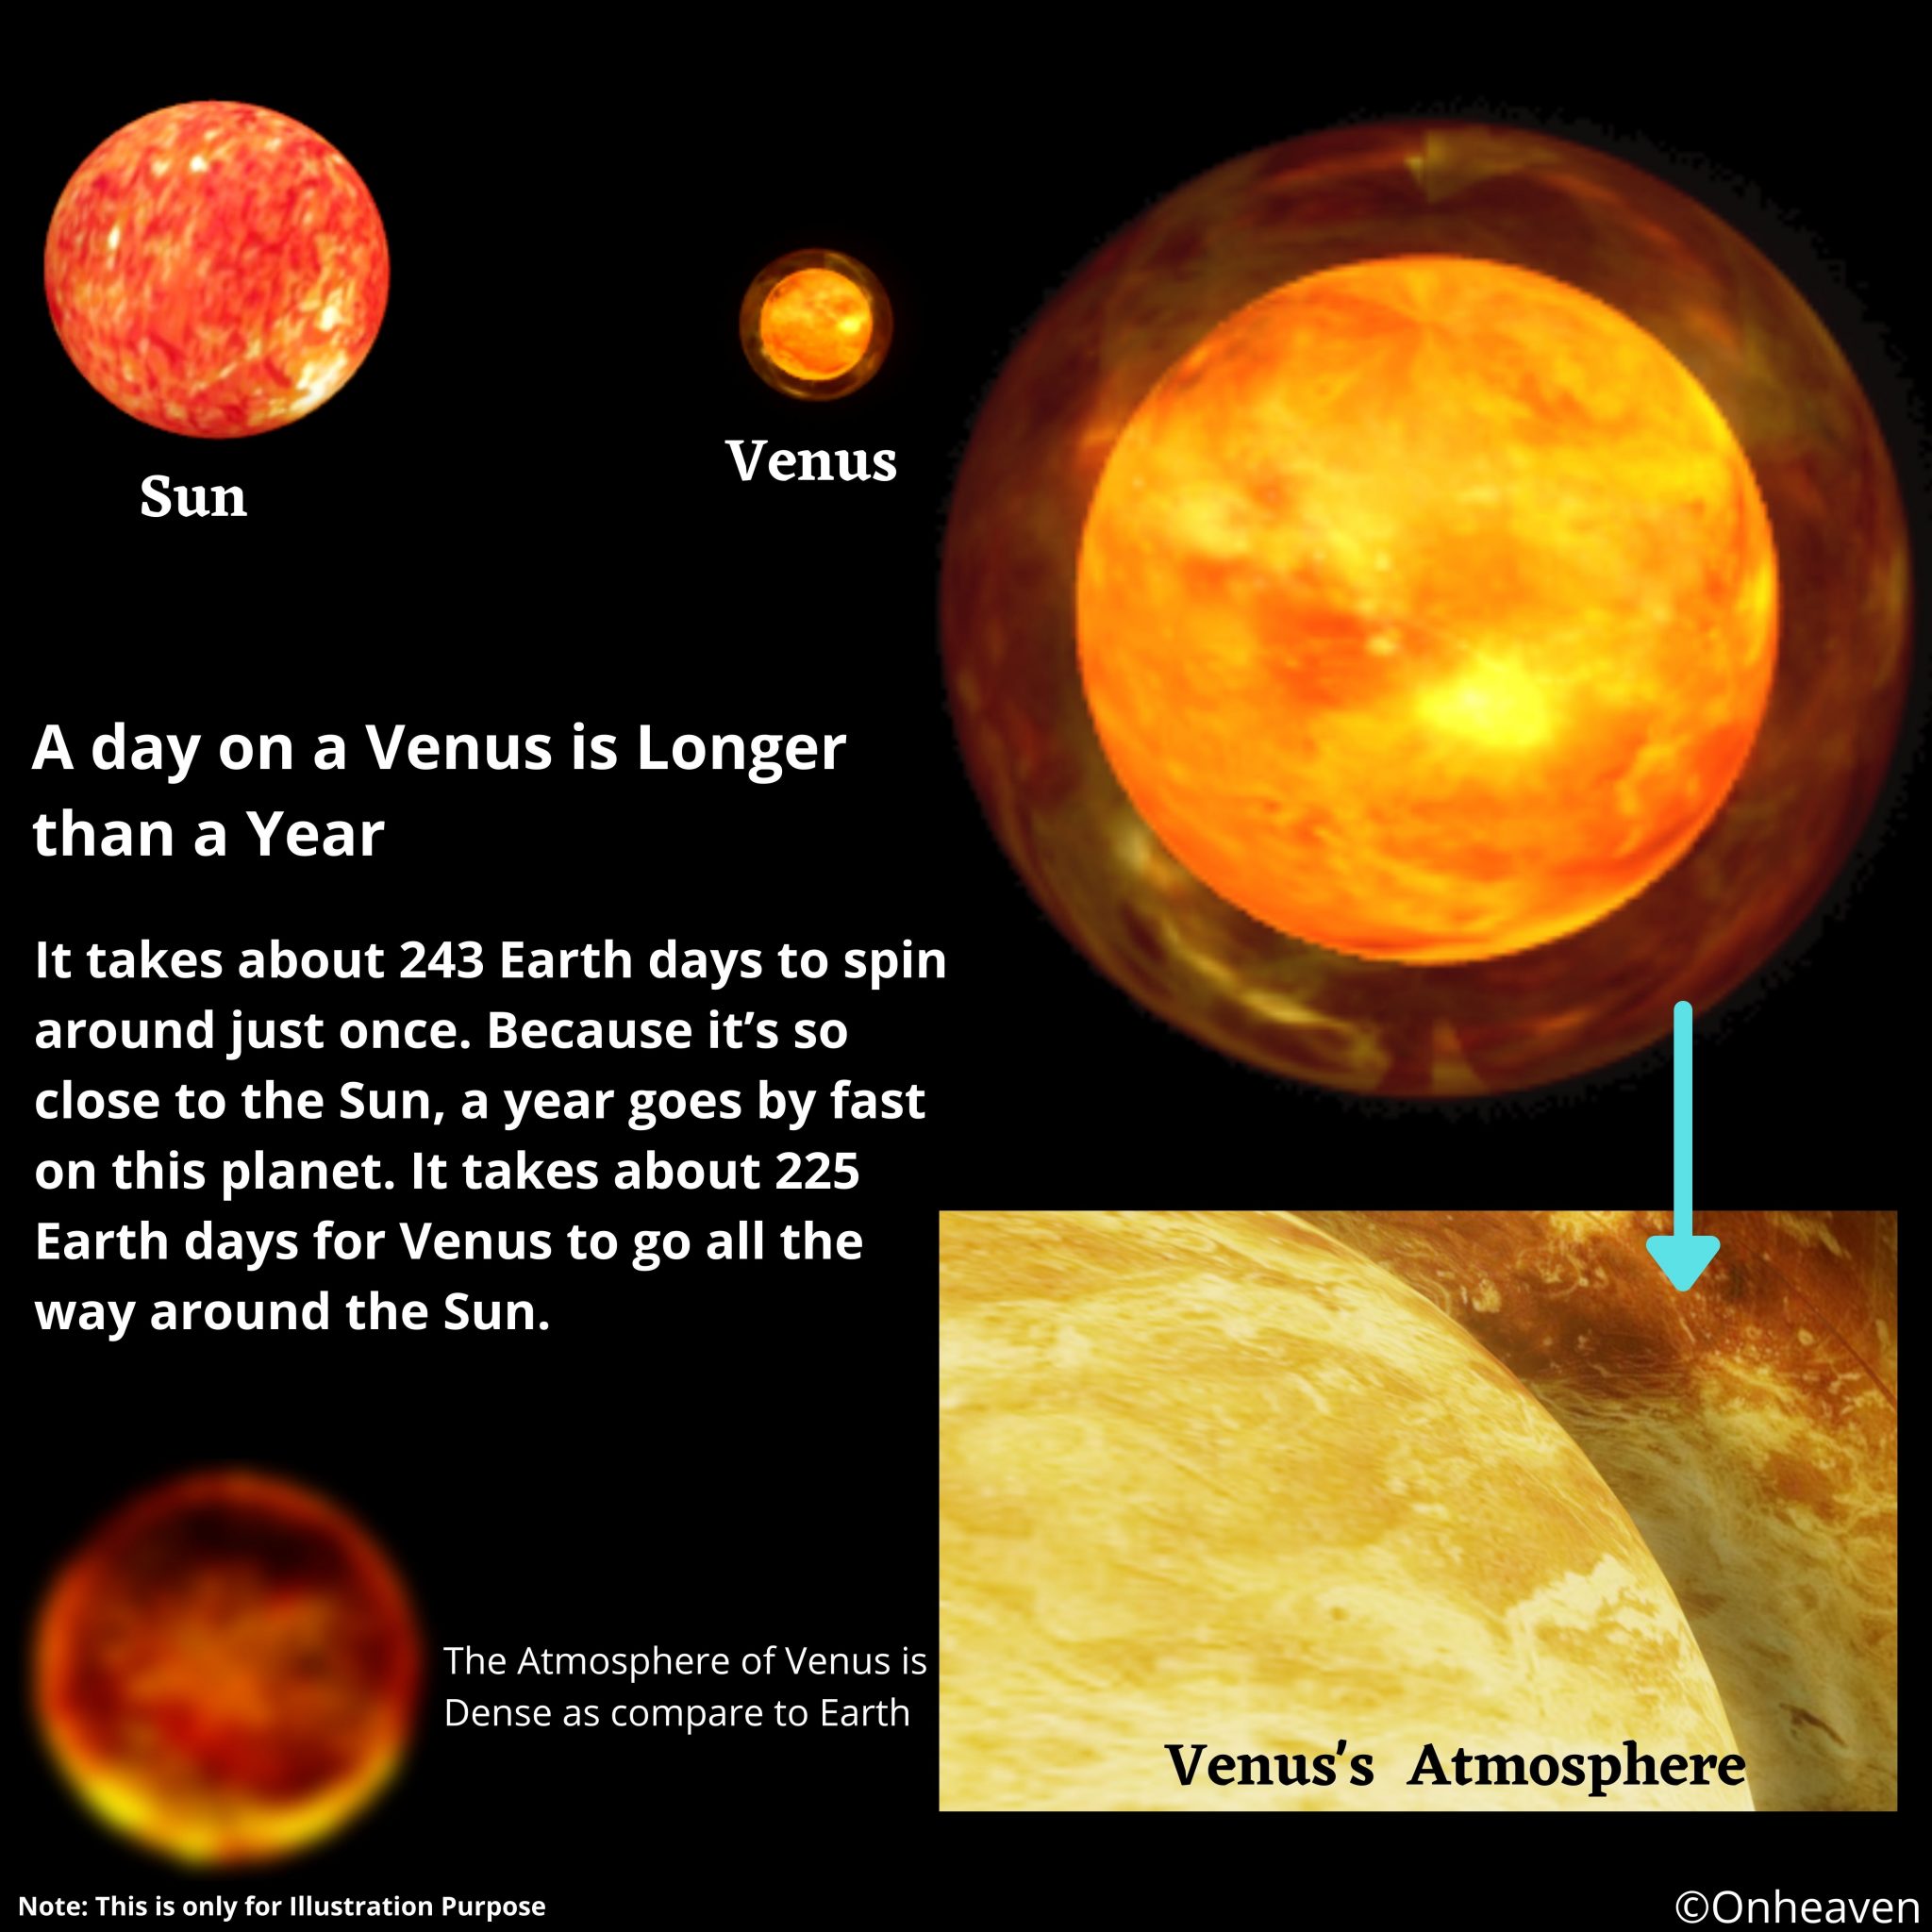 A day on a Venus is Longer Than a Year (1)